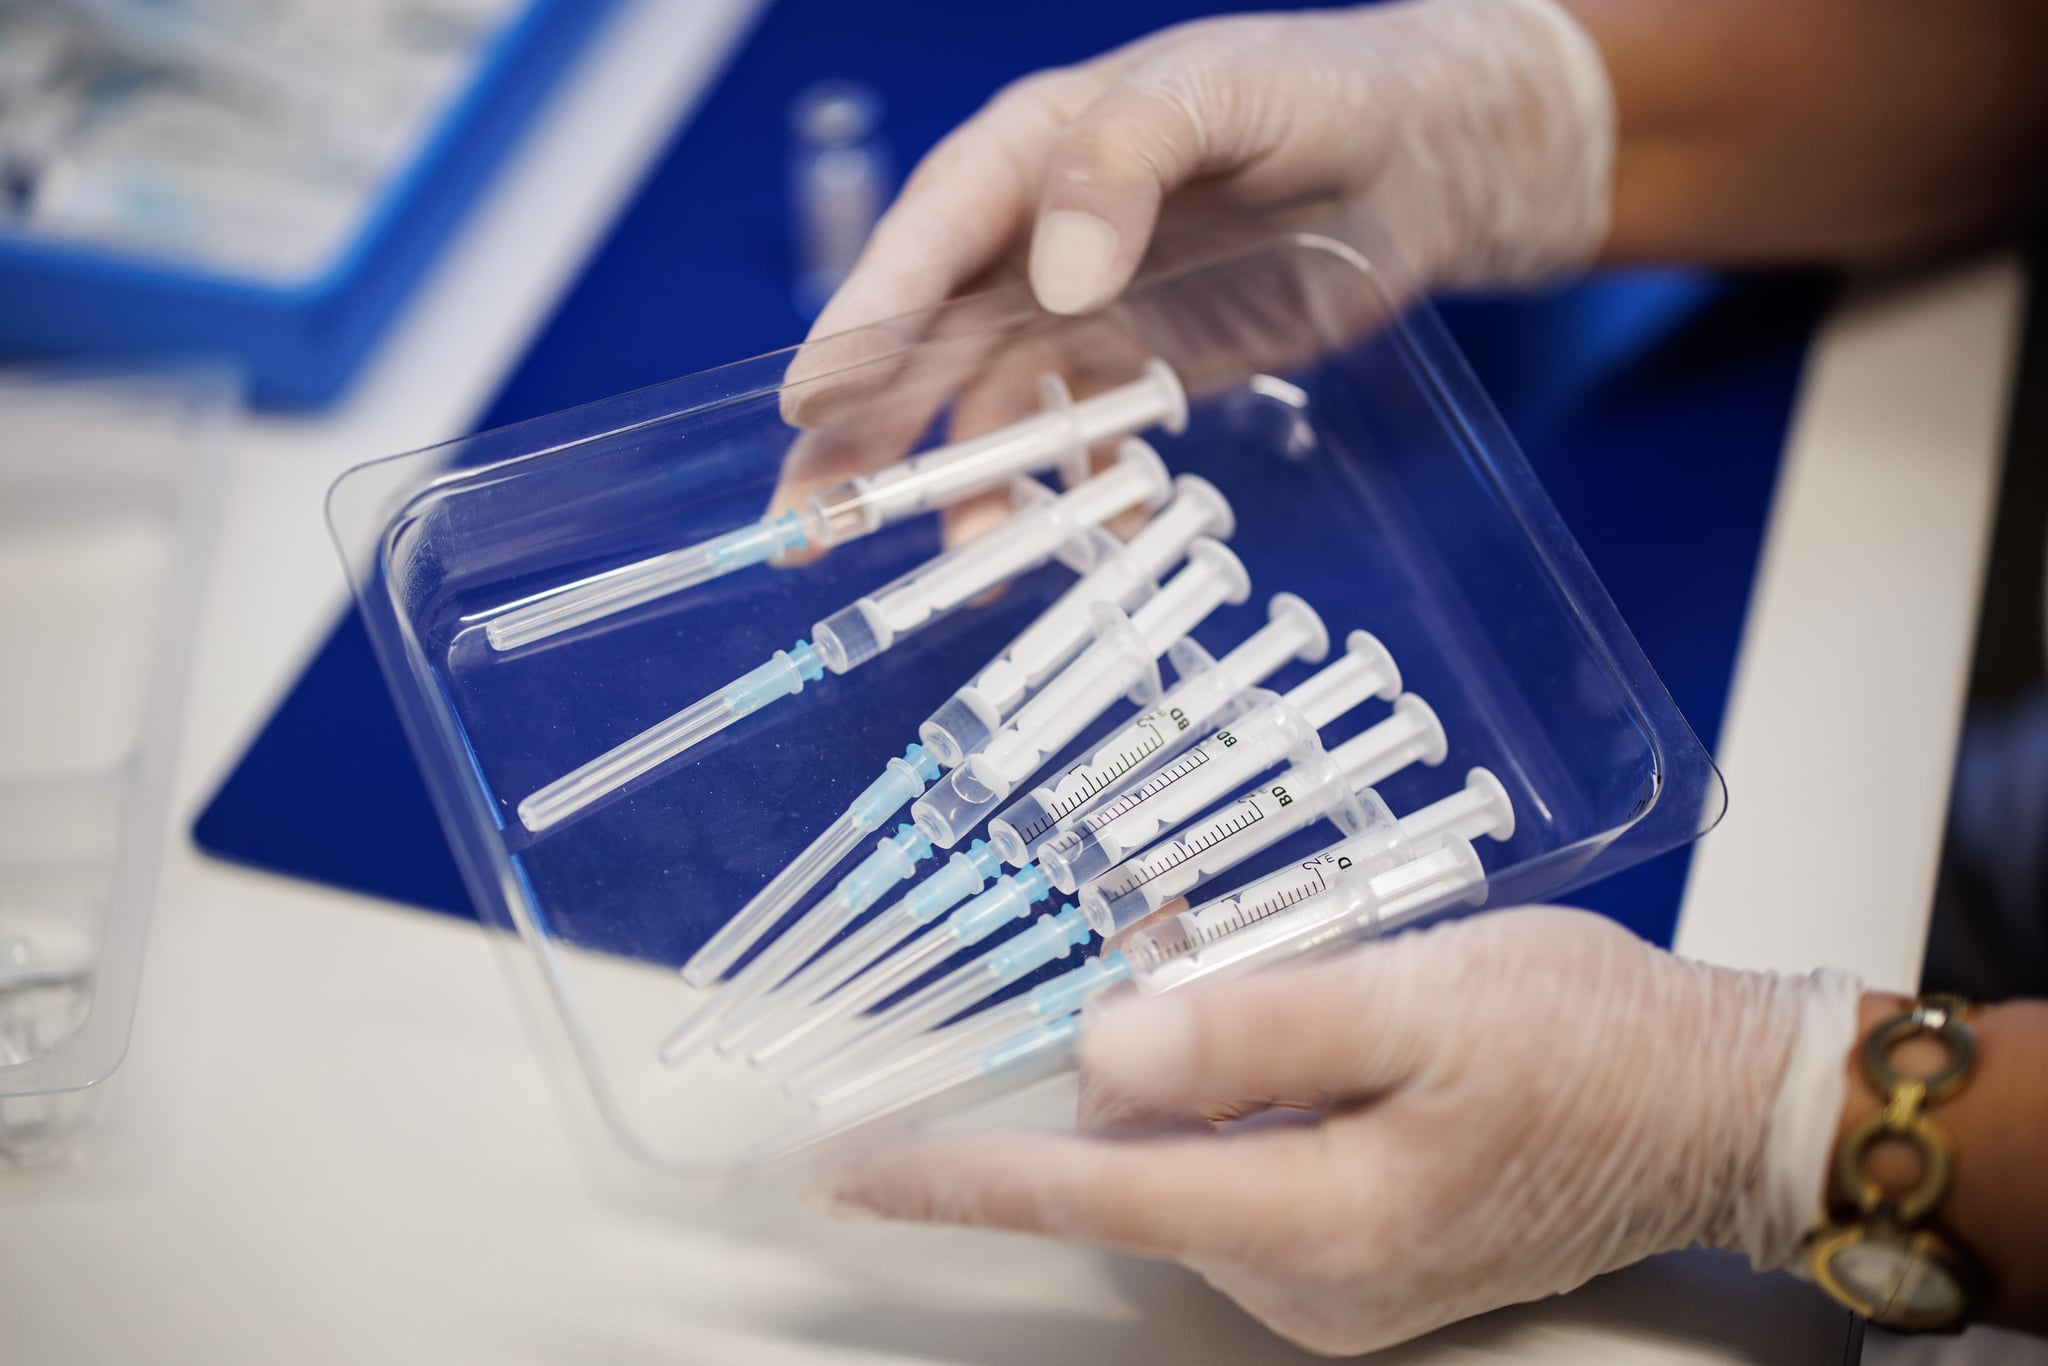 03 March 2022, Bavaria, Freising: A nurse holds a tray of syringes containing the vaccine Nuvaxovid from the manufacturer Novavax at the Freising Vaccination Center. Photo: Matthias Balk/dpa (Photo by Matthias Balk/picture alliance via Getty Images)